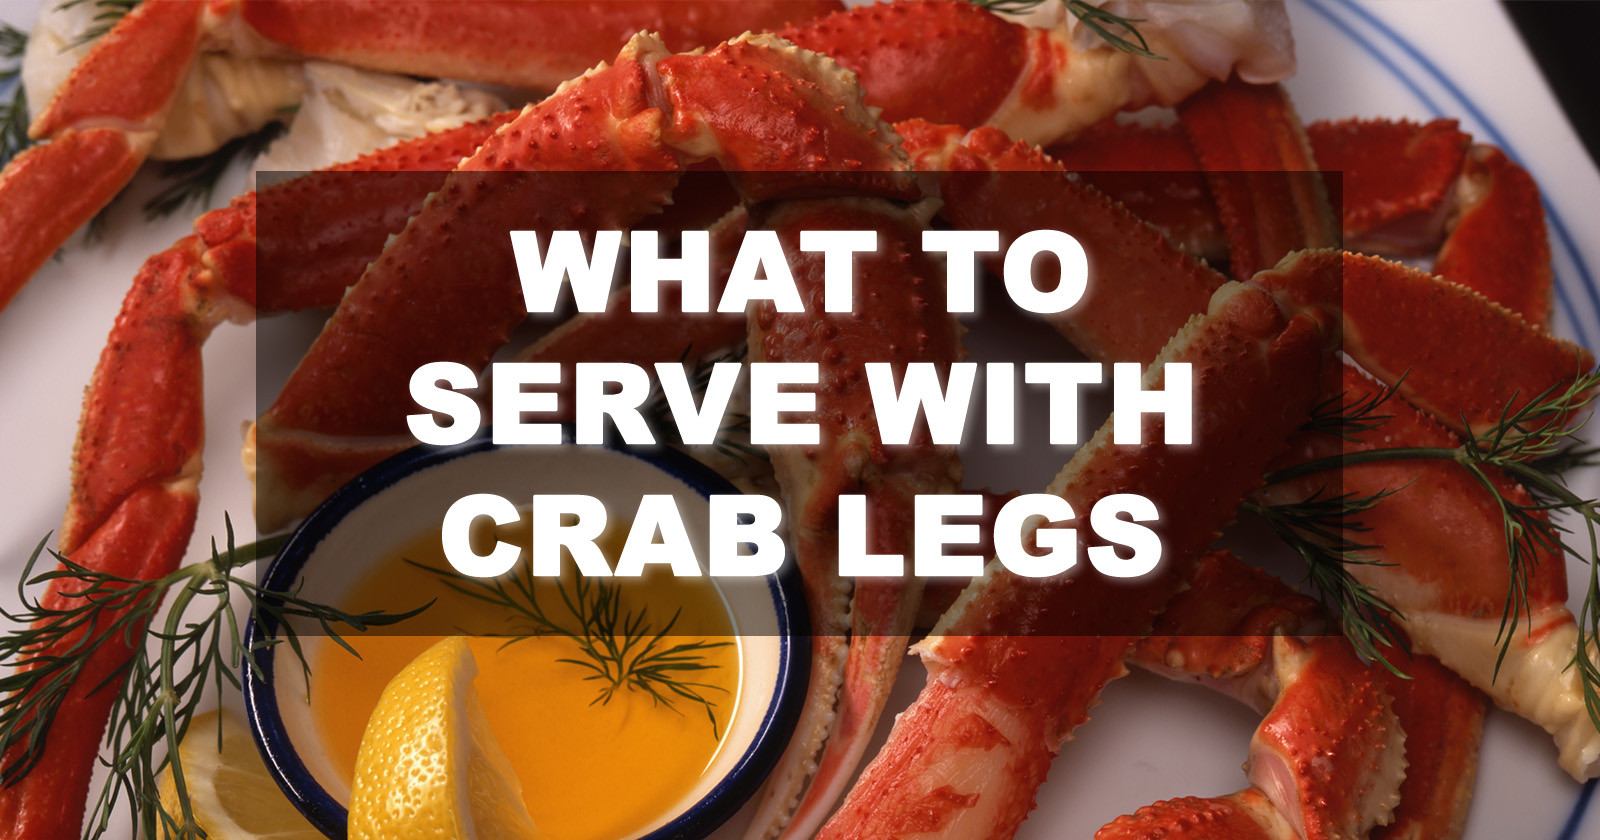 Top 22 Side Dishes for Crab Legs - Best Recipes Ideas and Collections